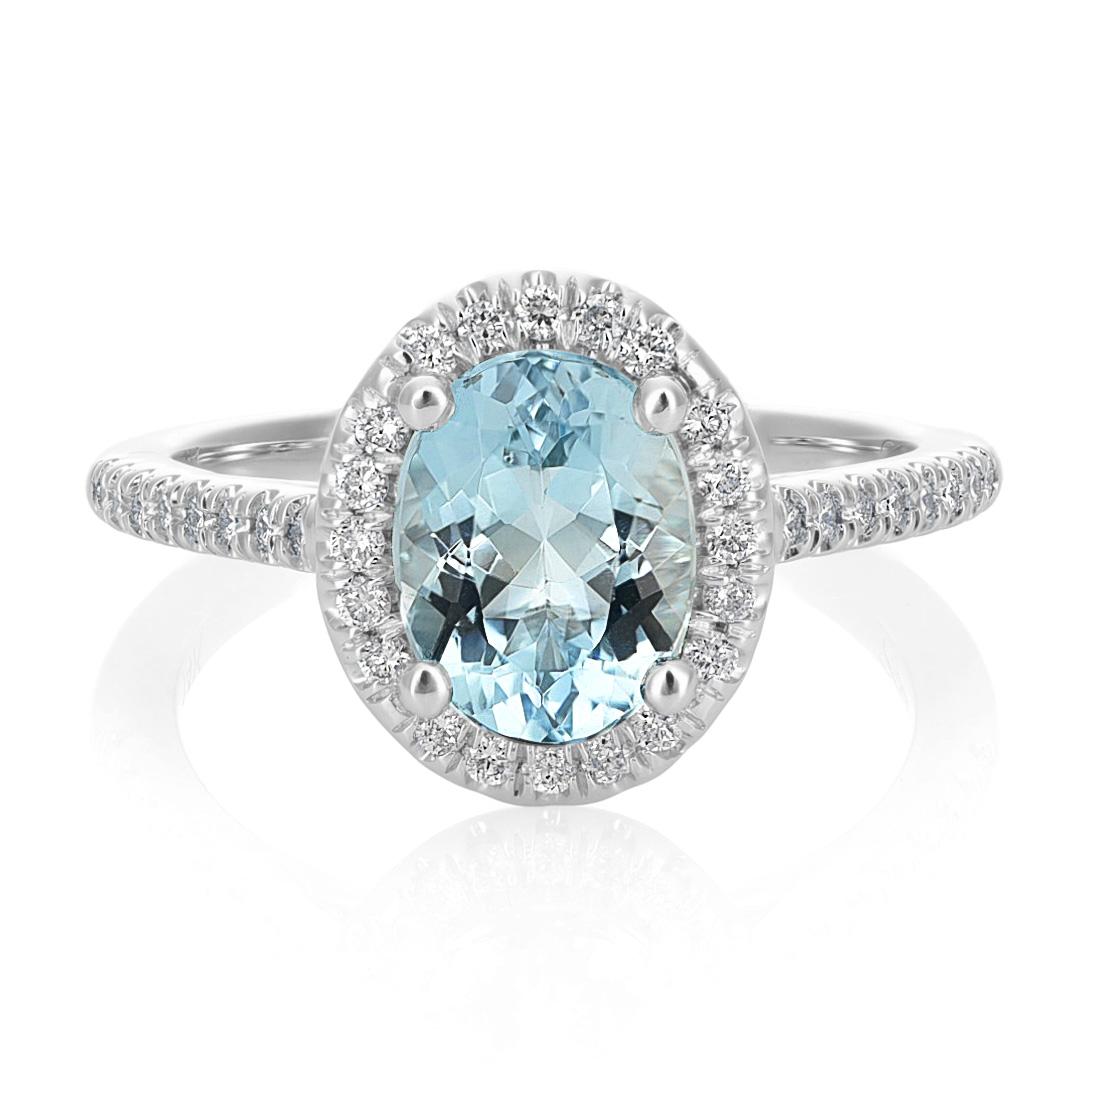 1.12 Carats Natural Aquamarine Diamonds set in 14K White Gold Ring In New Condition For Sale In Los Angeles, CA